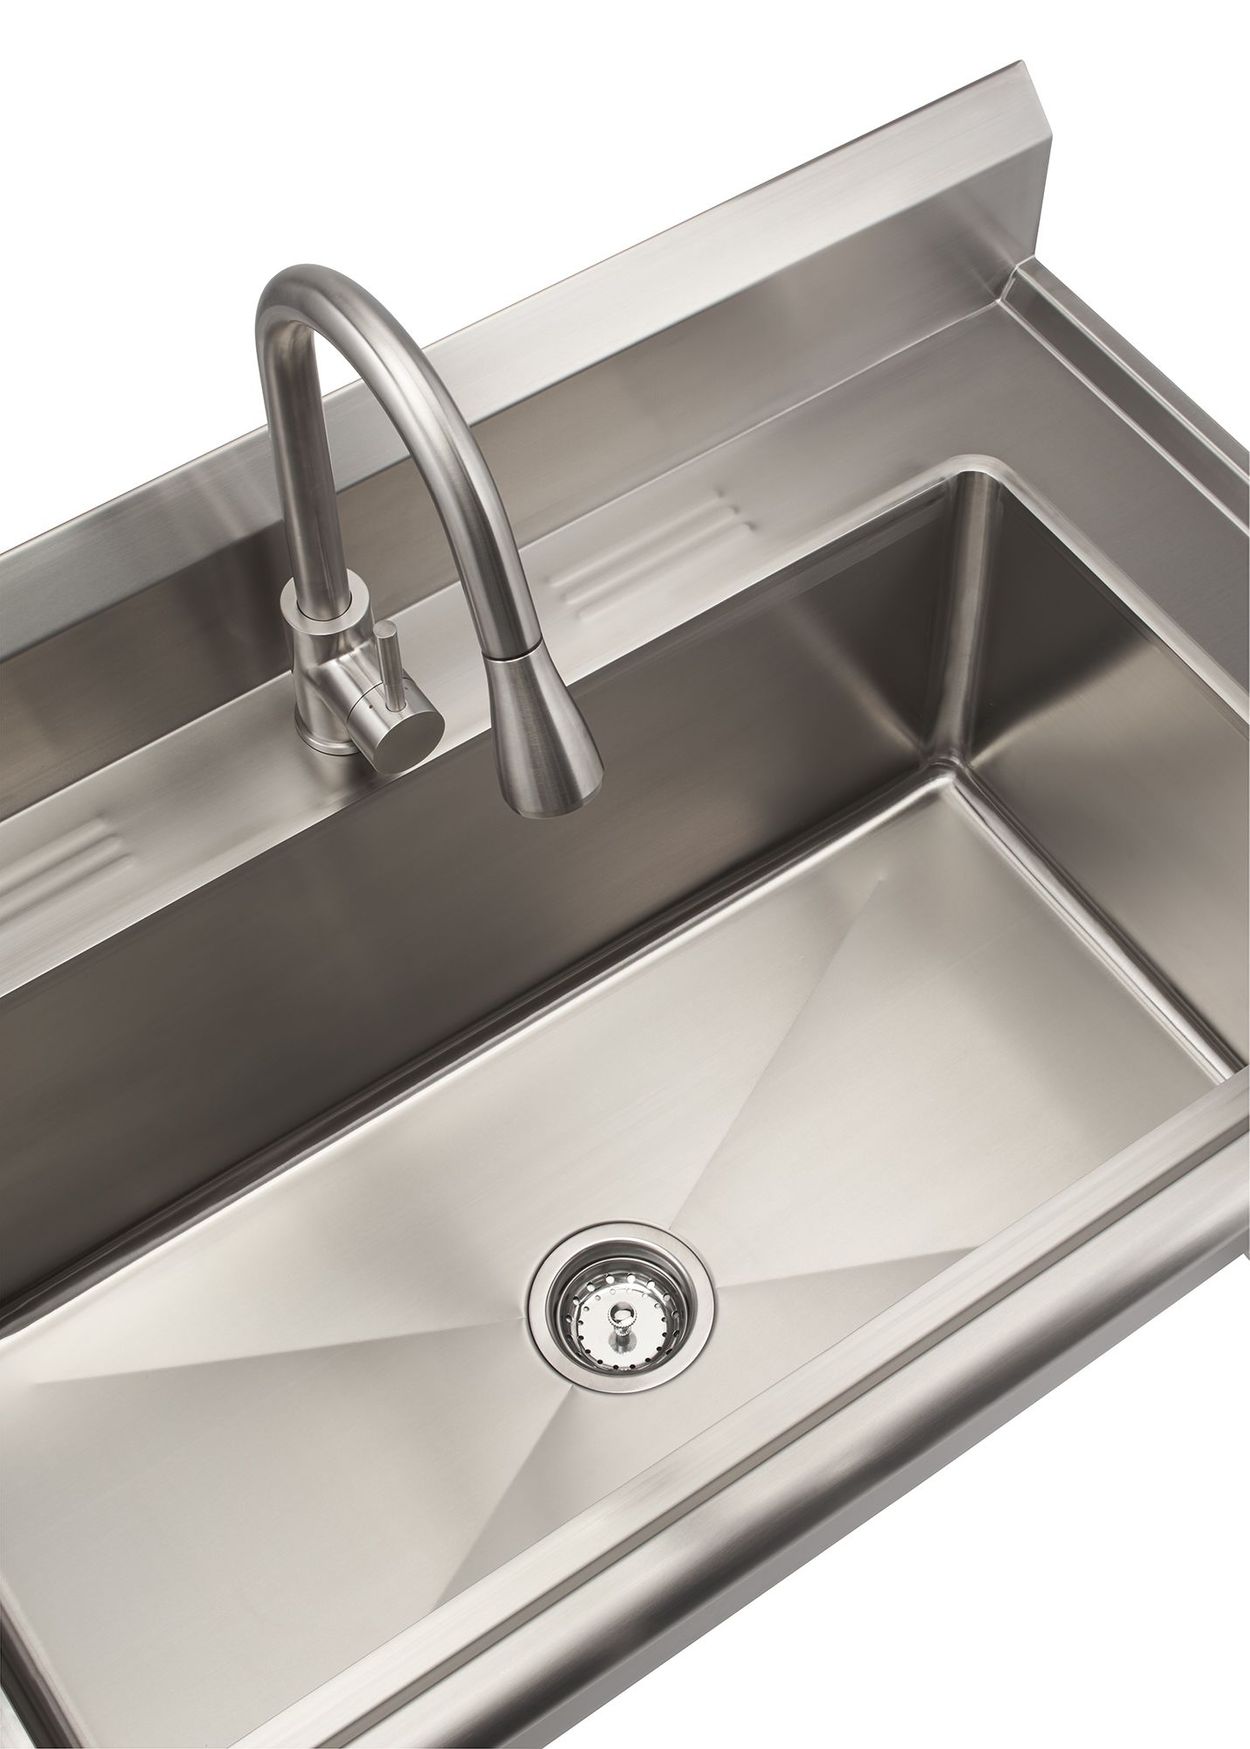 Stainless Steel Sink showing the depth of the basin